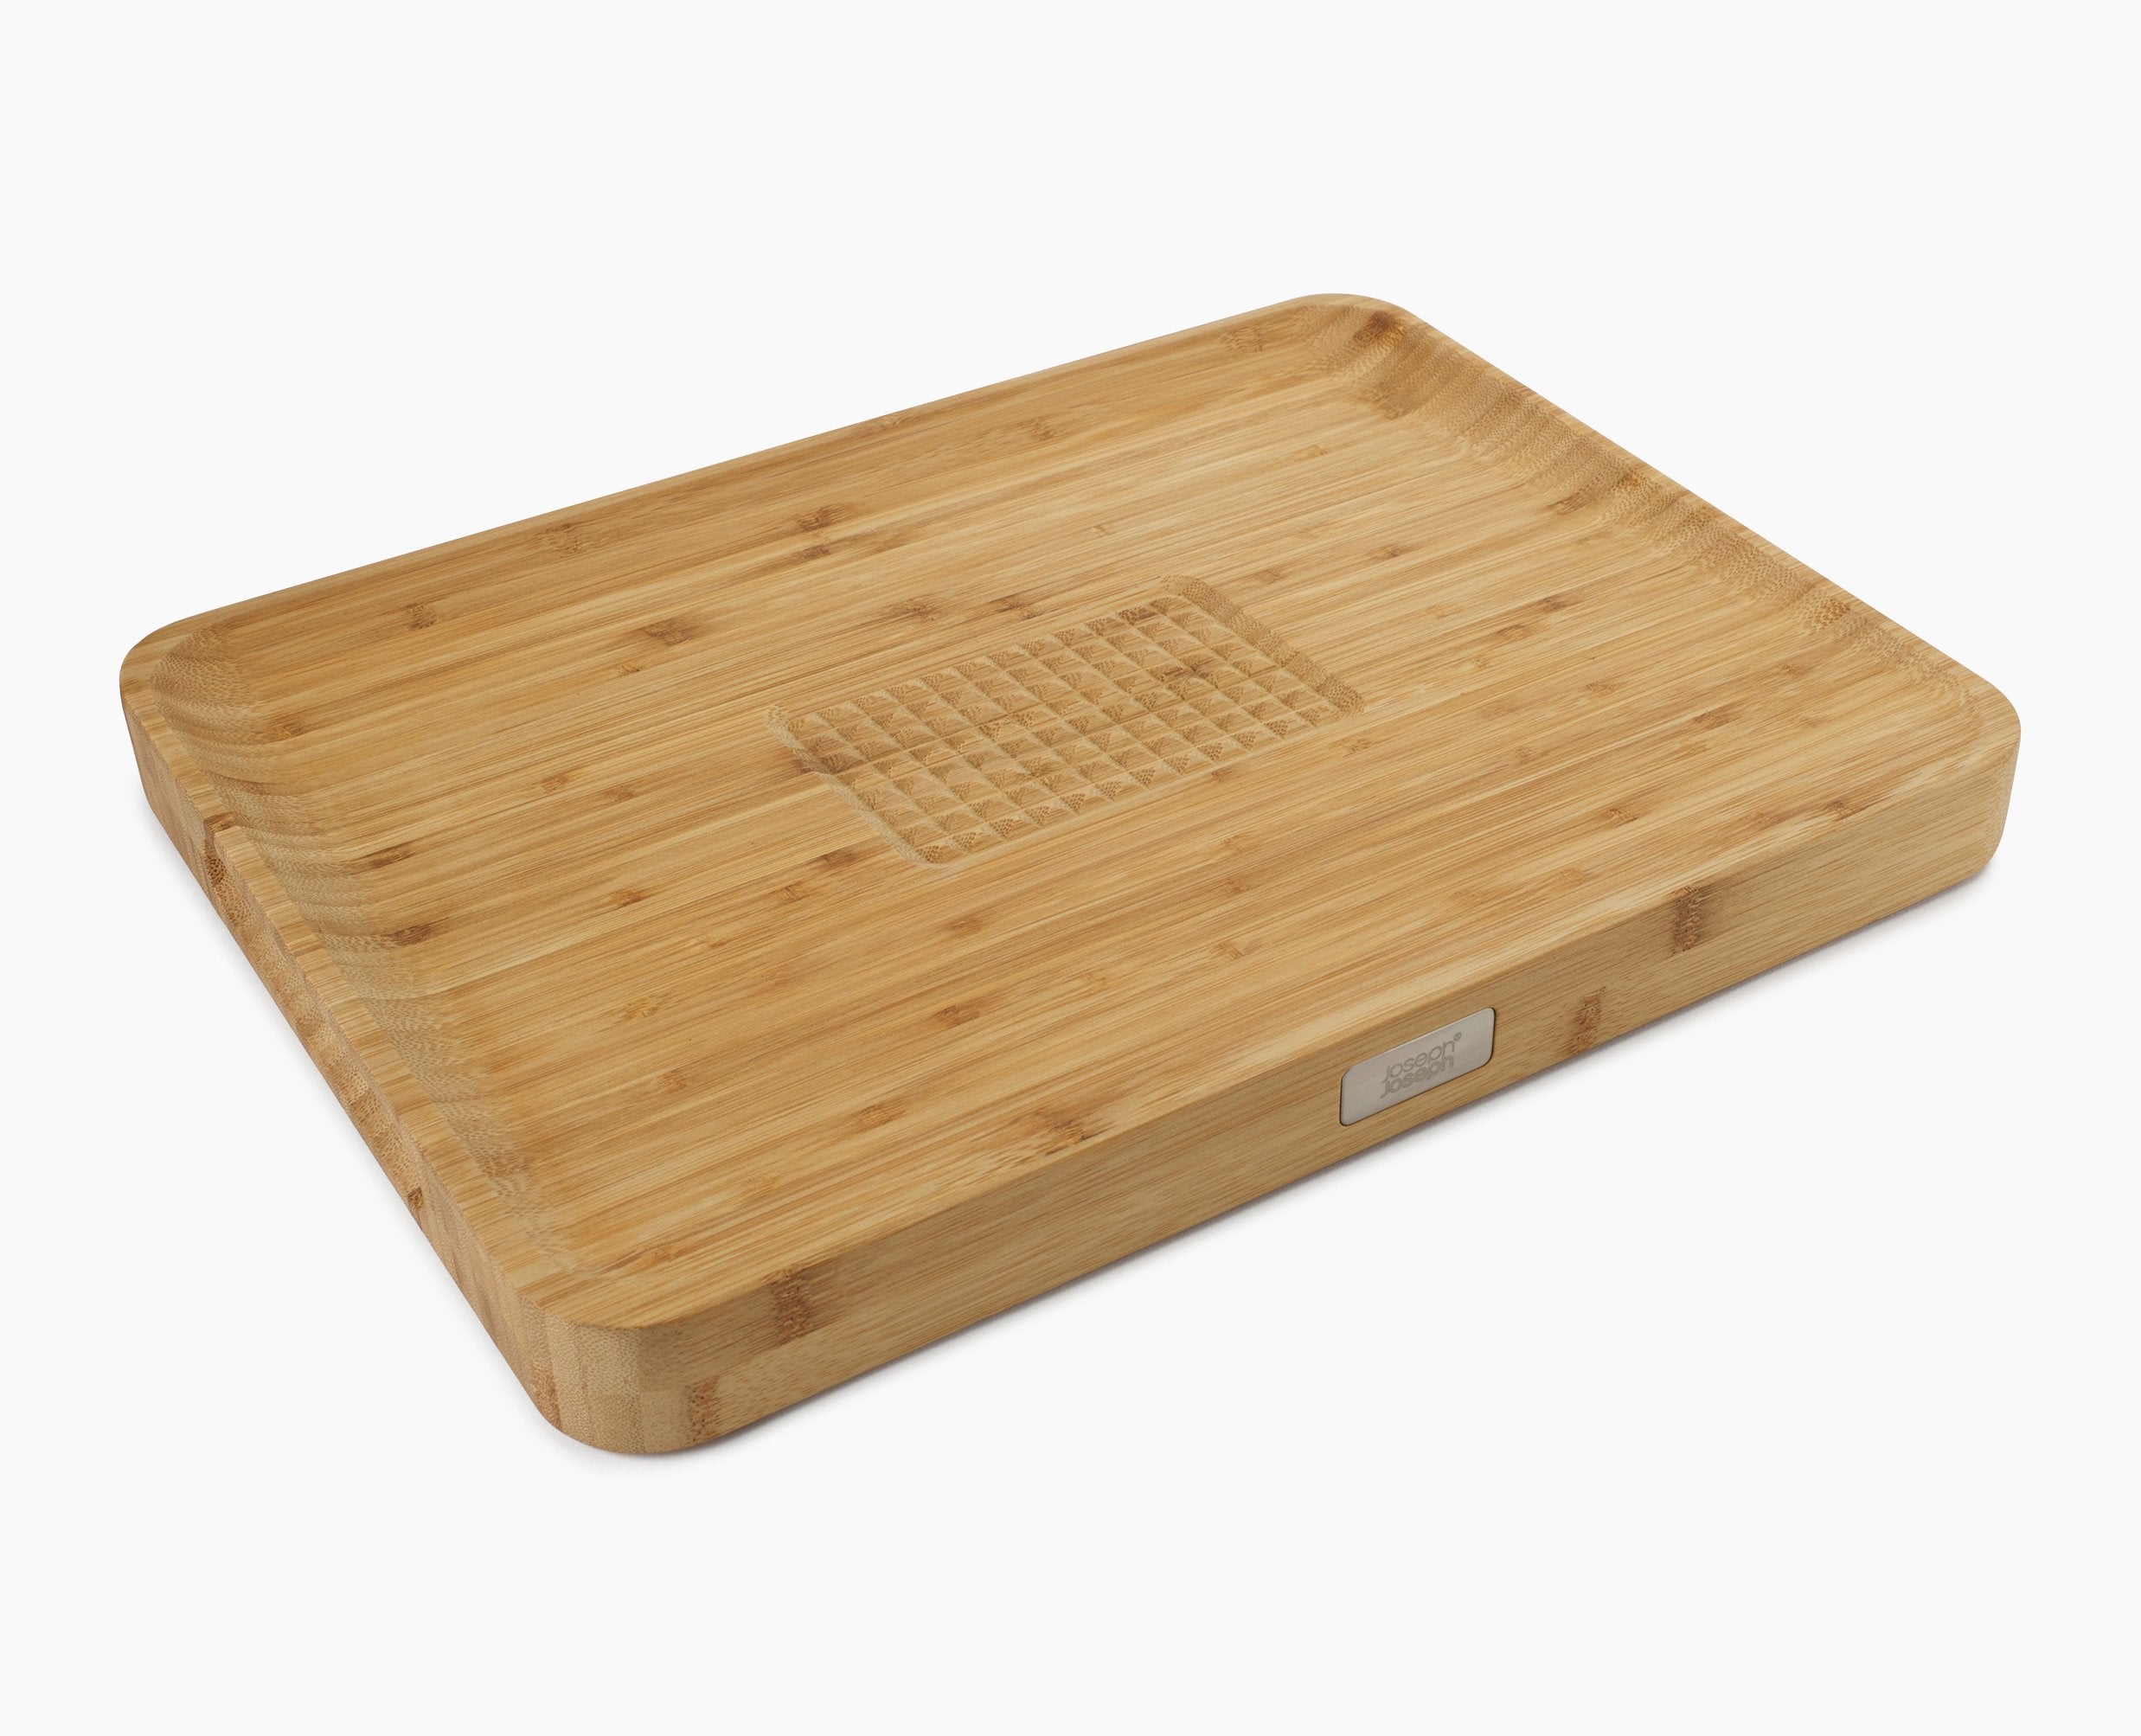 BEON.COM.AU  This heavy-duty bamboo chopping board features an integrated food grip to hold your meat, vegetables or bread in place while you cut and has an angled surface to collect any meat juices or breadcrumbs.  Angled cutting surface catches meat juices and bread crumbs Central food grip for holding mea... Joseph Joseph at BEON.COM.AU